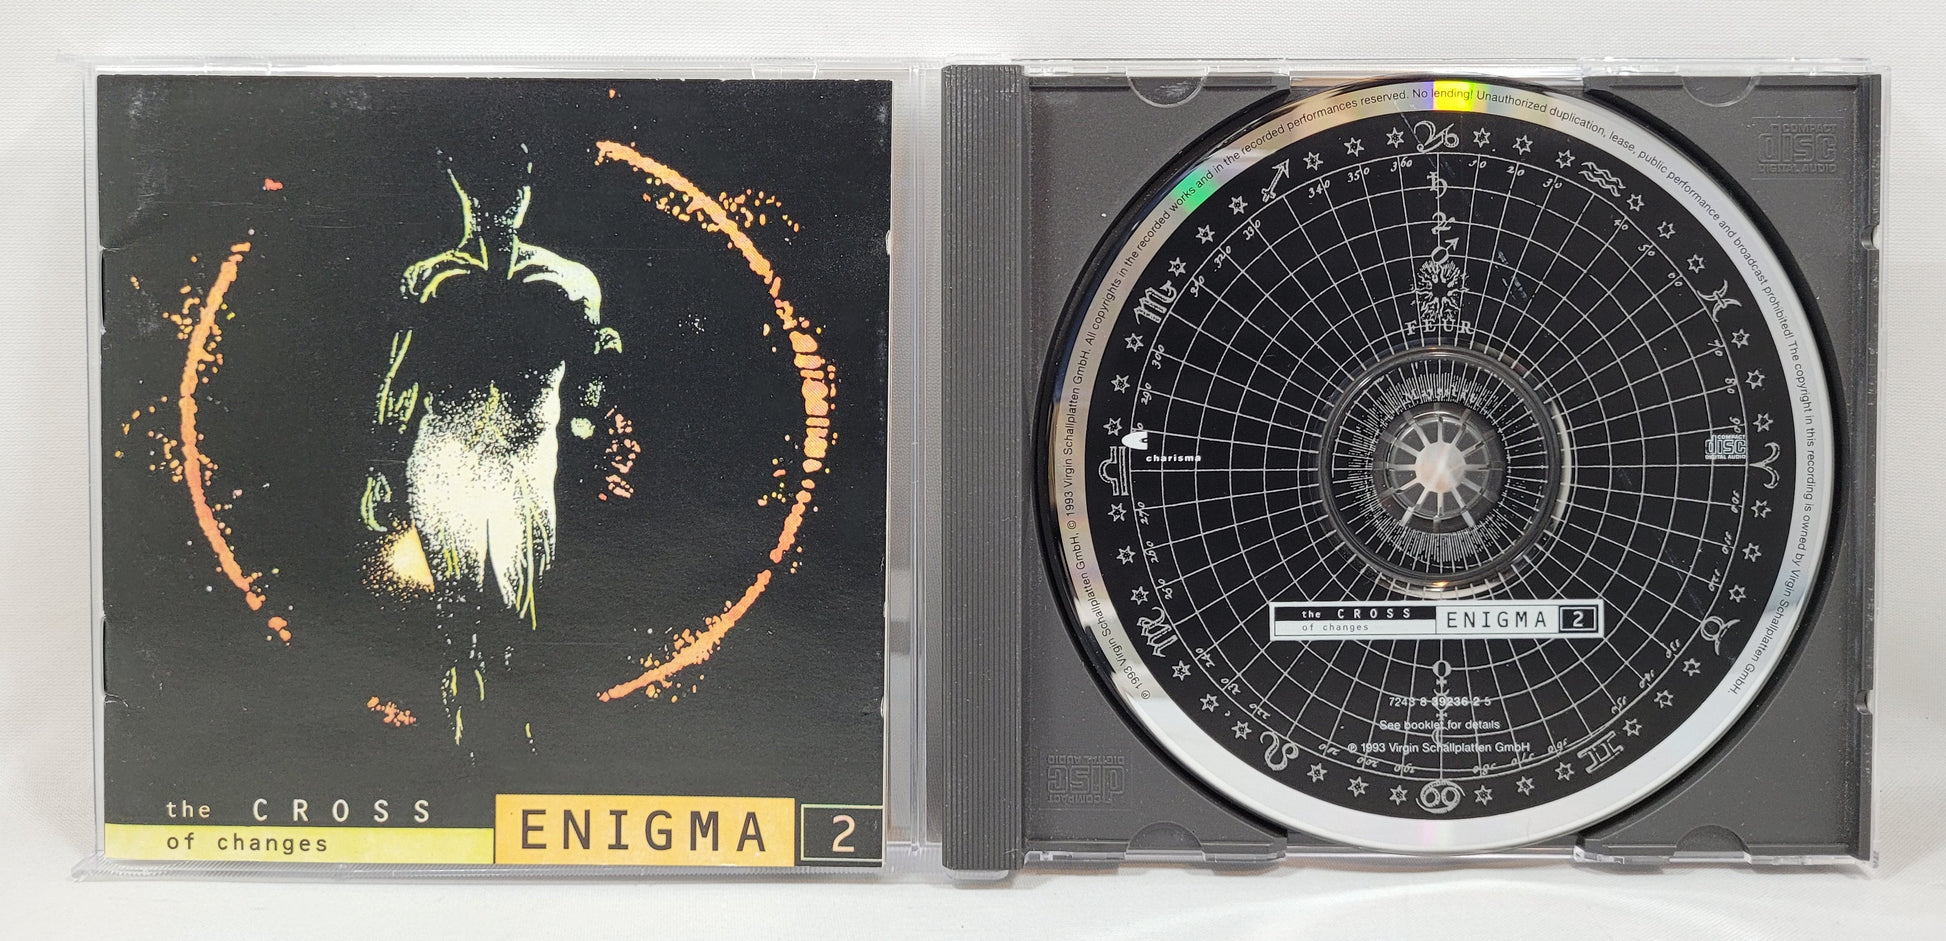 Enigma - The Cross of Changes [1993 Used CD]